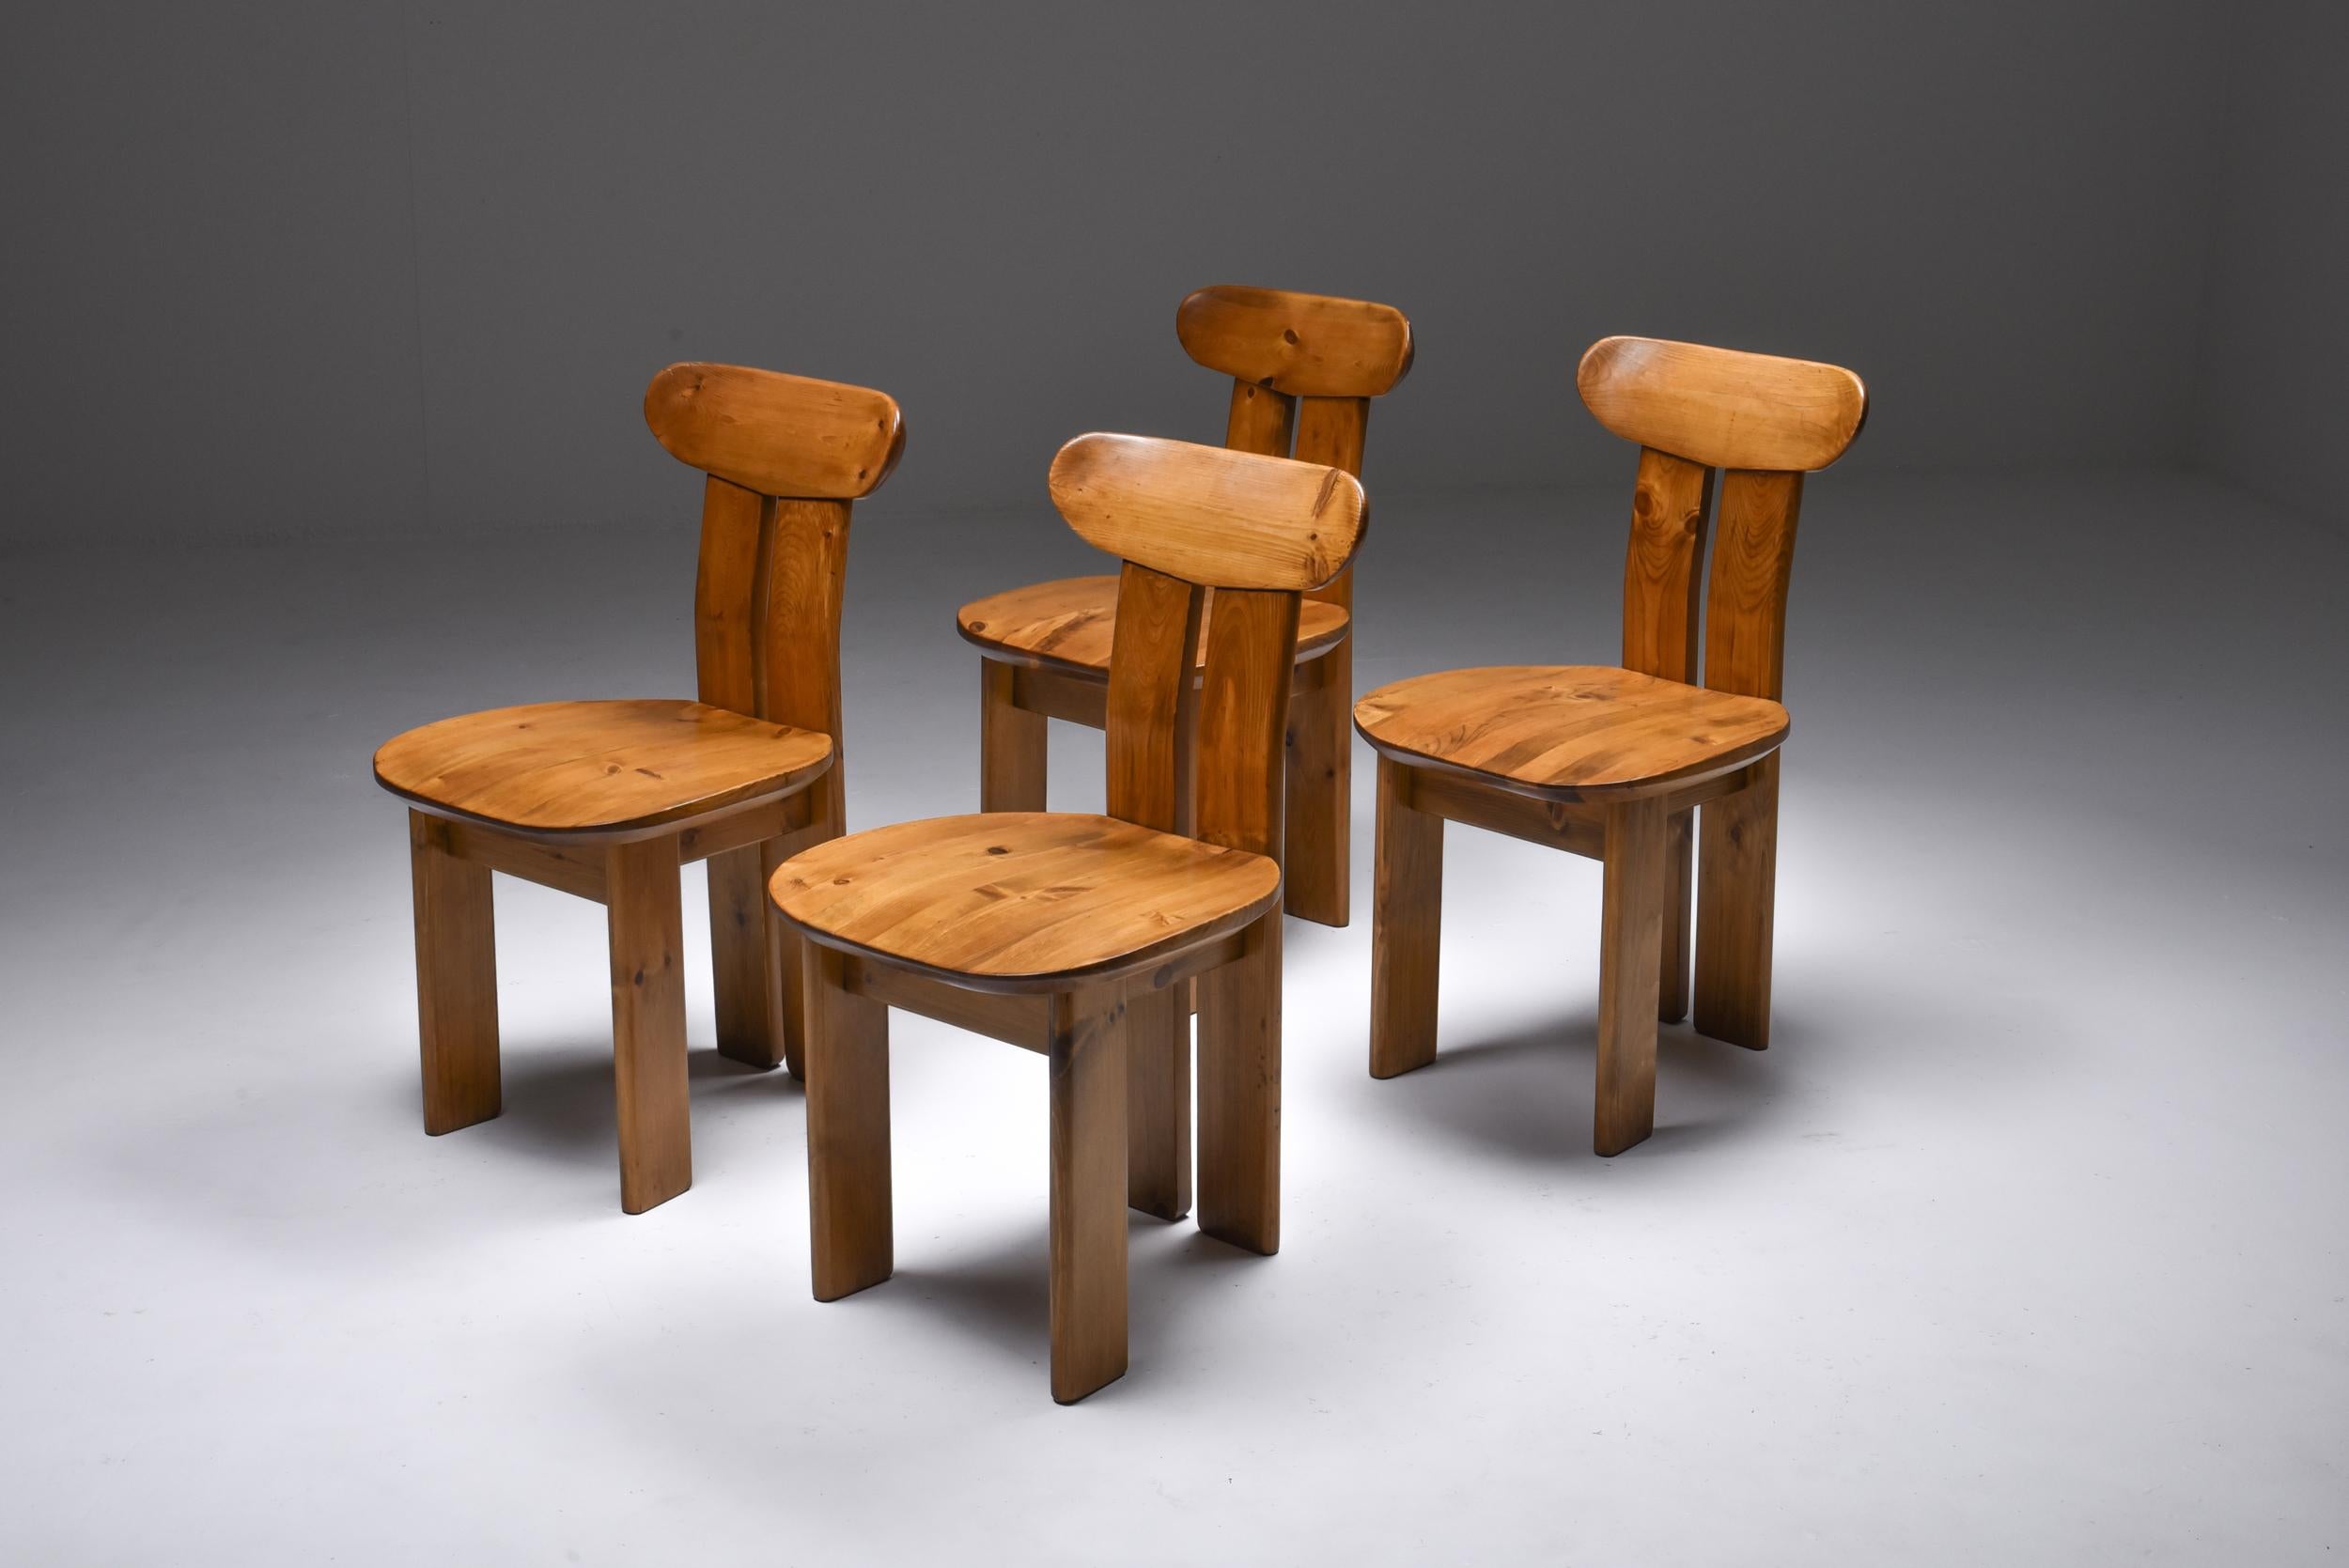 Italian design, dining chairs, Mobilgirgi, Mario Marenco, pinus, 1970s

Set of four dining chairs reminiscing of Afra and Tobia Scarpa's africa chairs from the artona series.
But in a more toned down and rustic version.
 